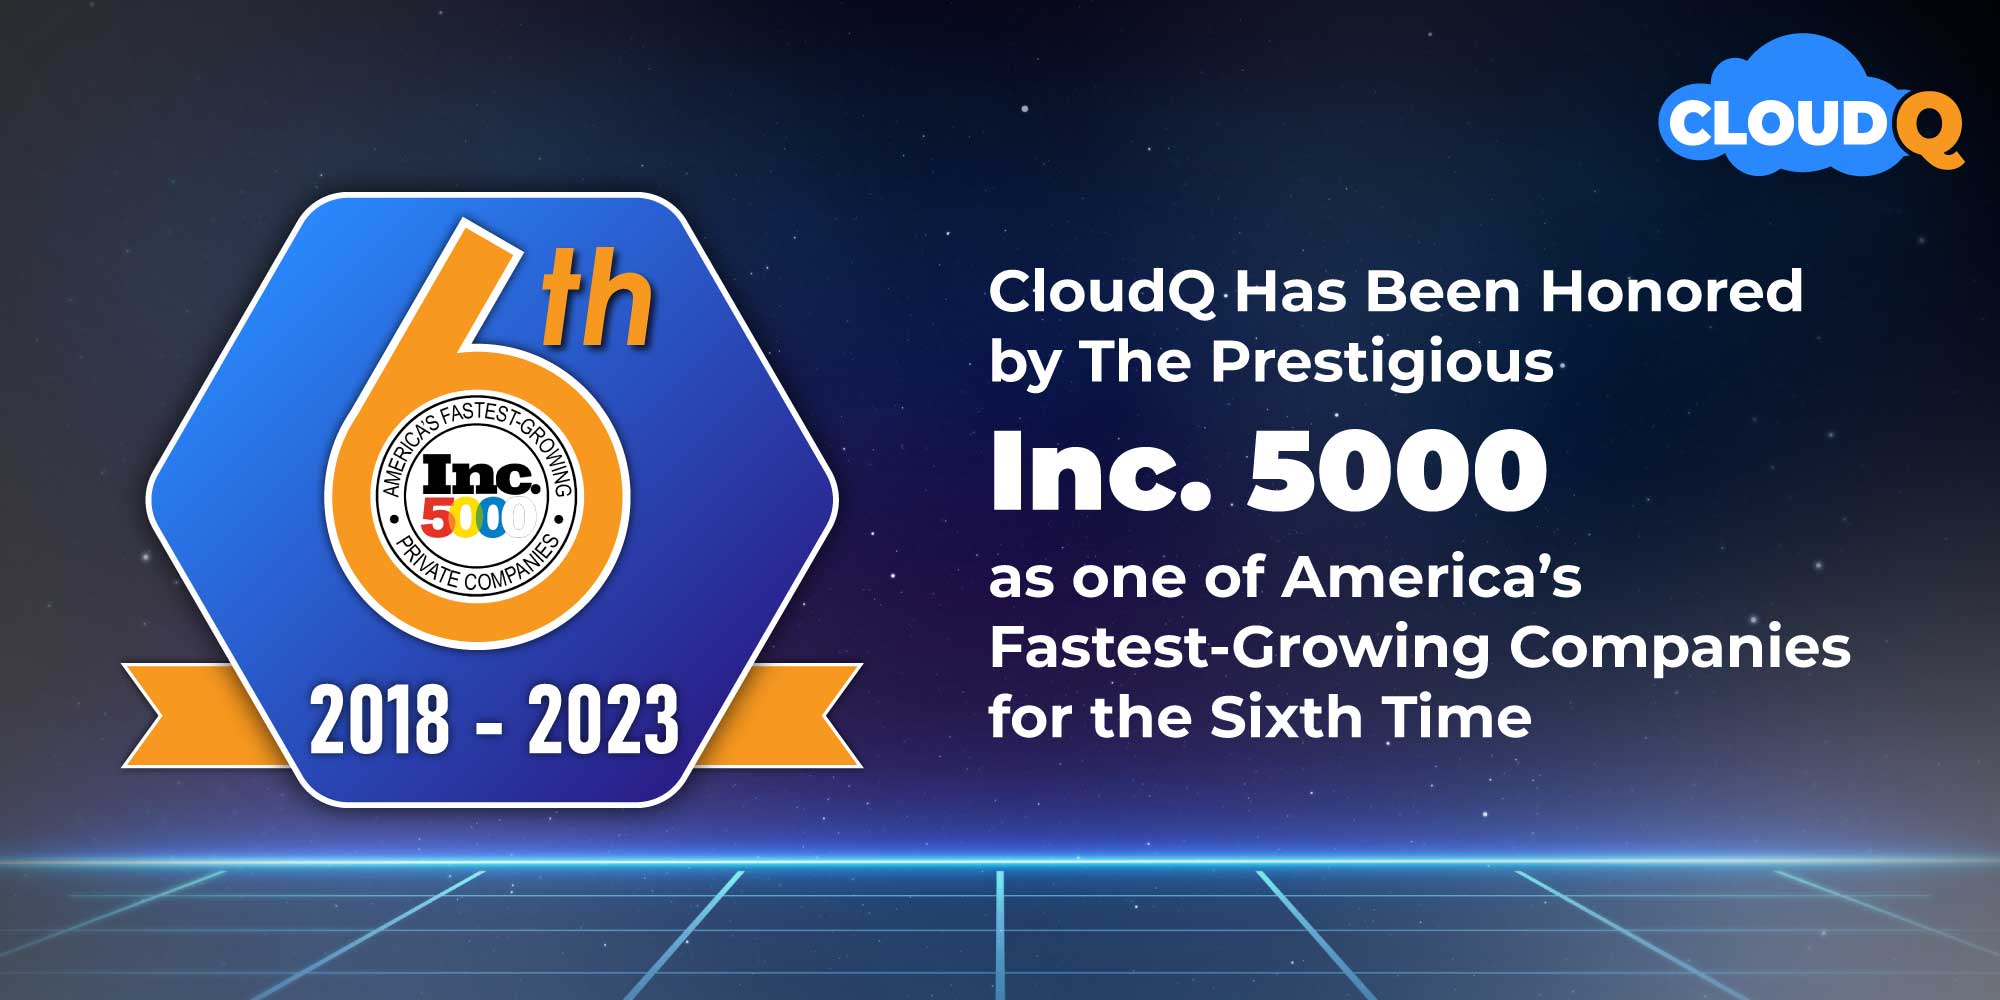 CloudQ Has Been Honored by The Prestigious Inc. 5000